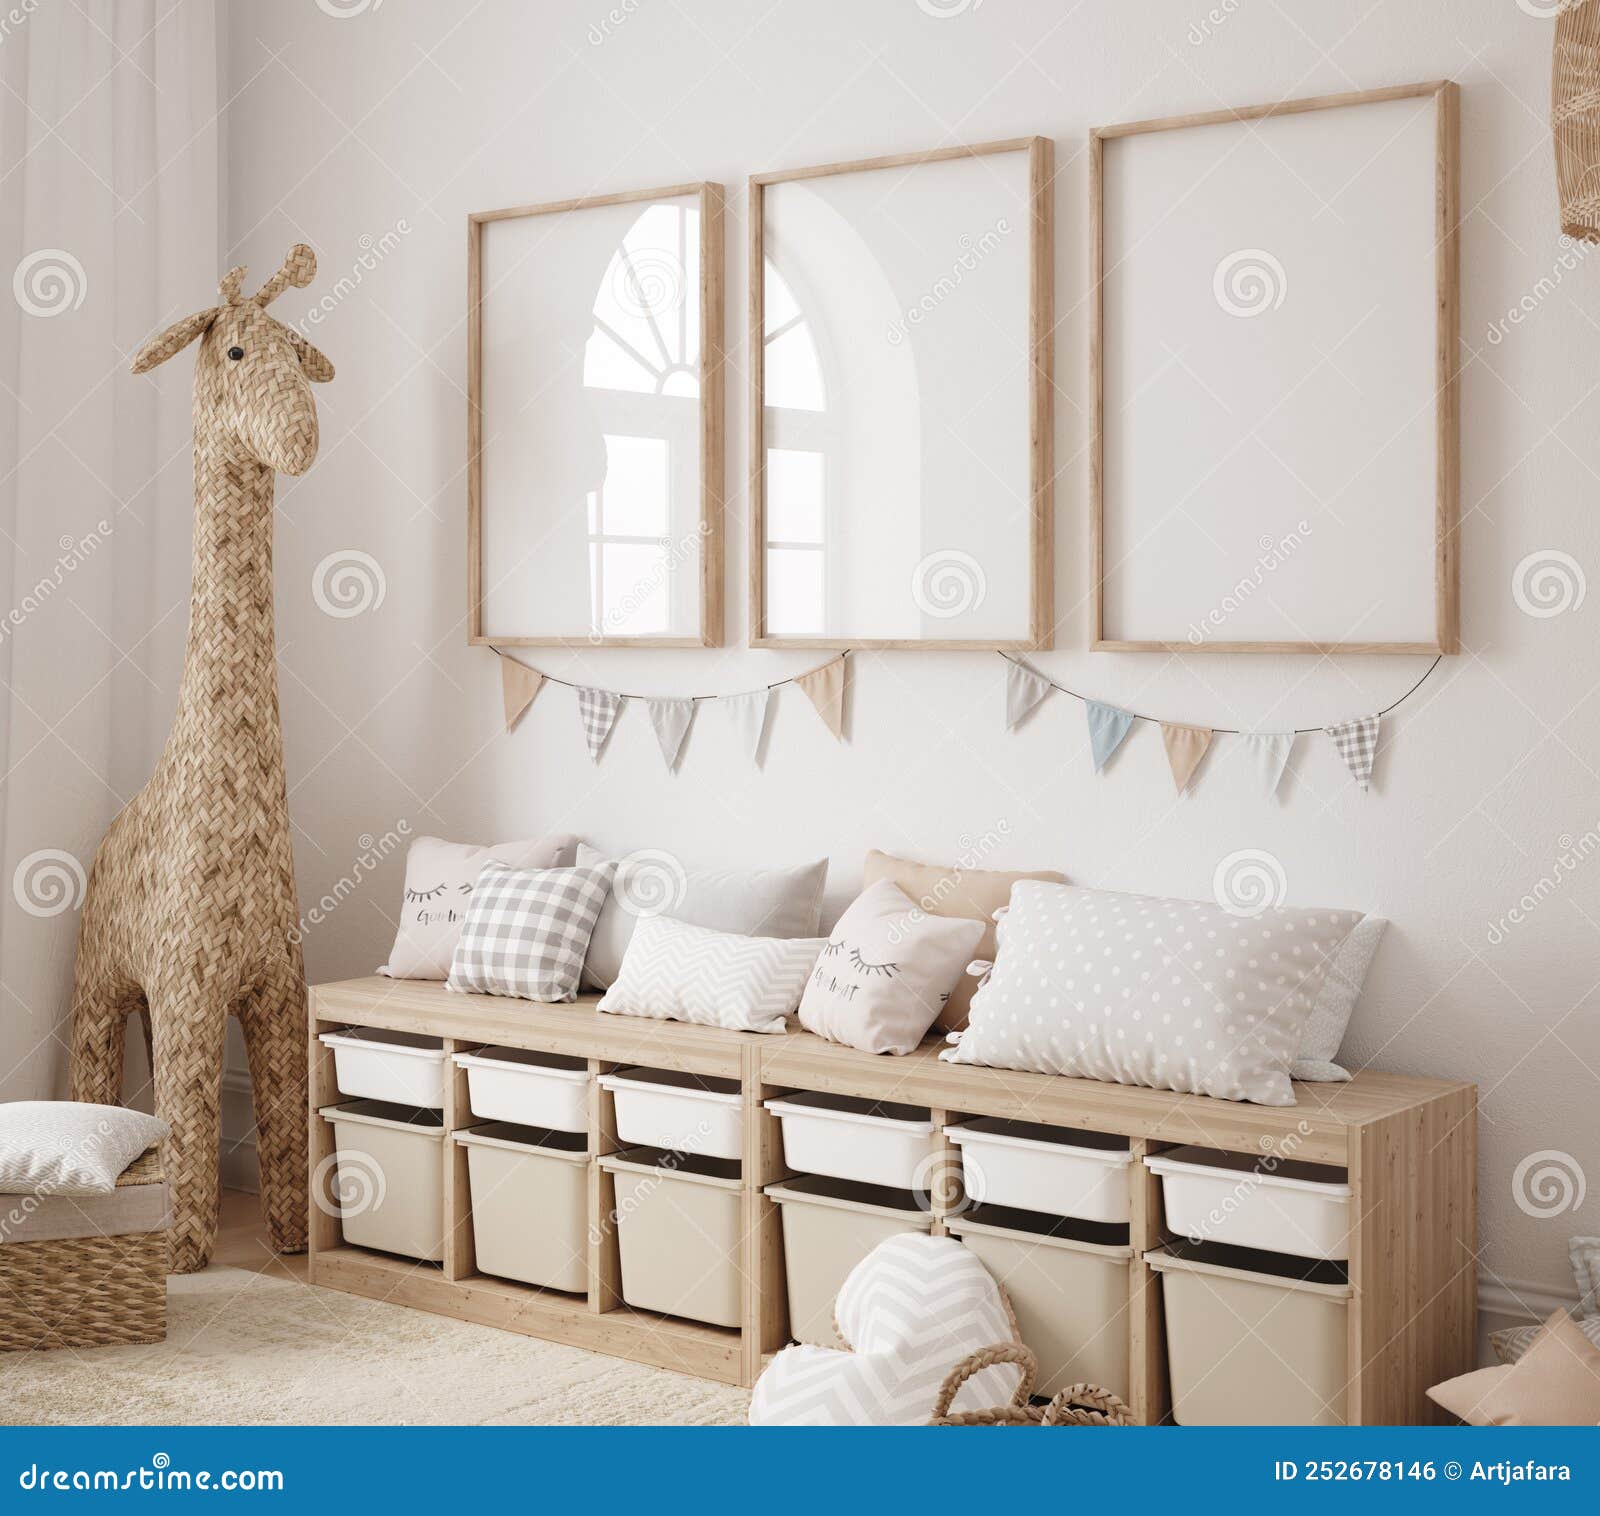 mock up frame in children room with natural wooden furniture, farmhouse style interior background